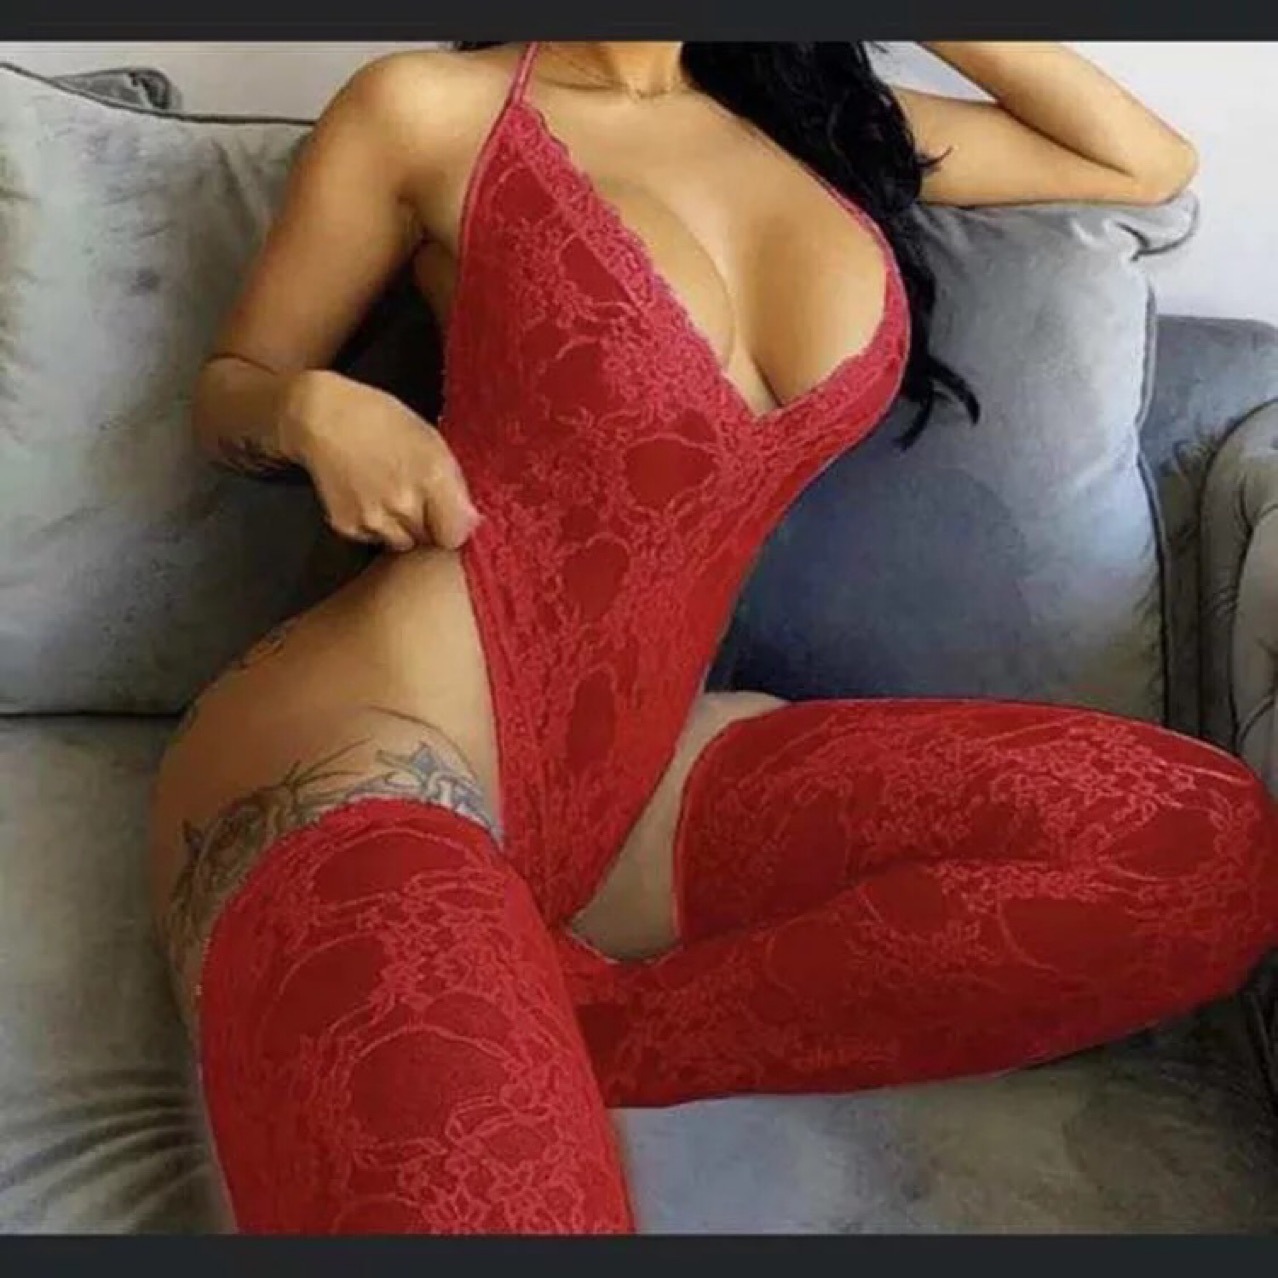 Plus Size Costume Erotic Lingerie Set Lace 6 Color Teddy Red Two Piece Women Lingerie Bodysuit With Stockings